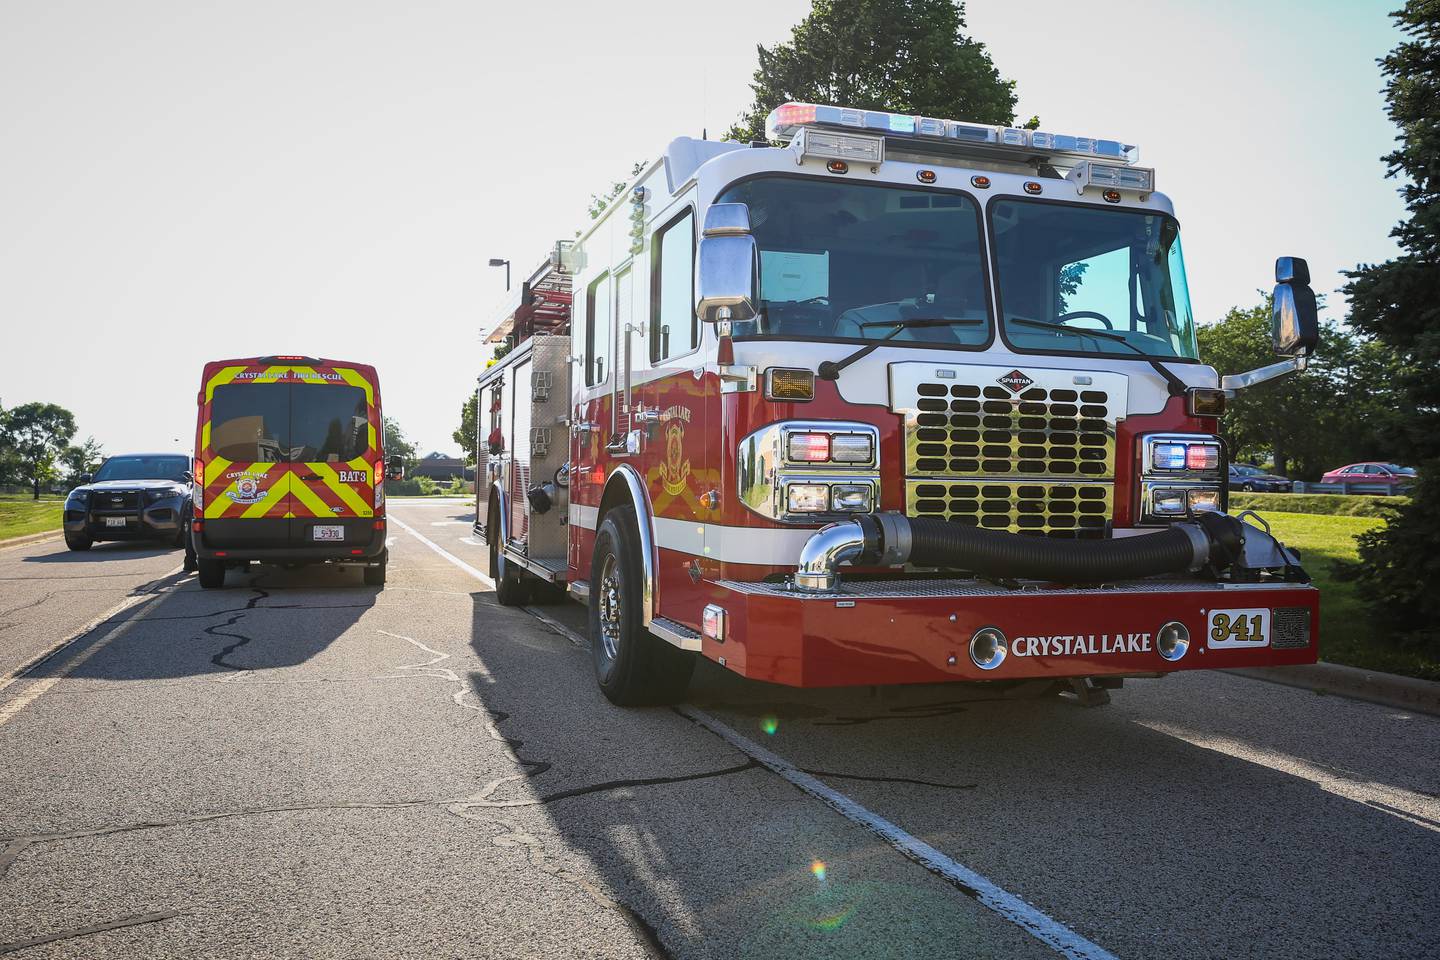 Crystal Lake Fire and Rescue, with help from police, public works and residents, rescued two girls who entered a storm drain and got lost inside the system on Tuesday, June 21, 2022.